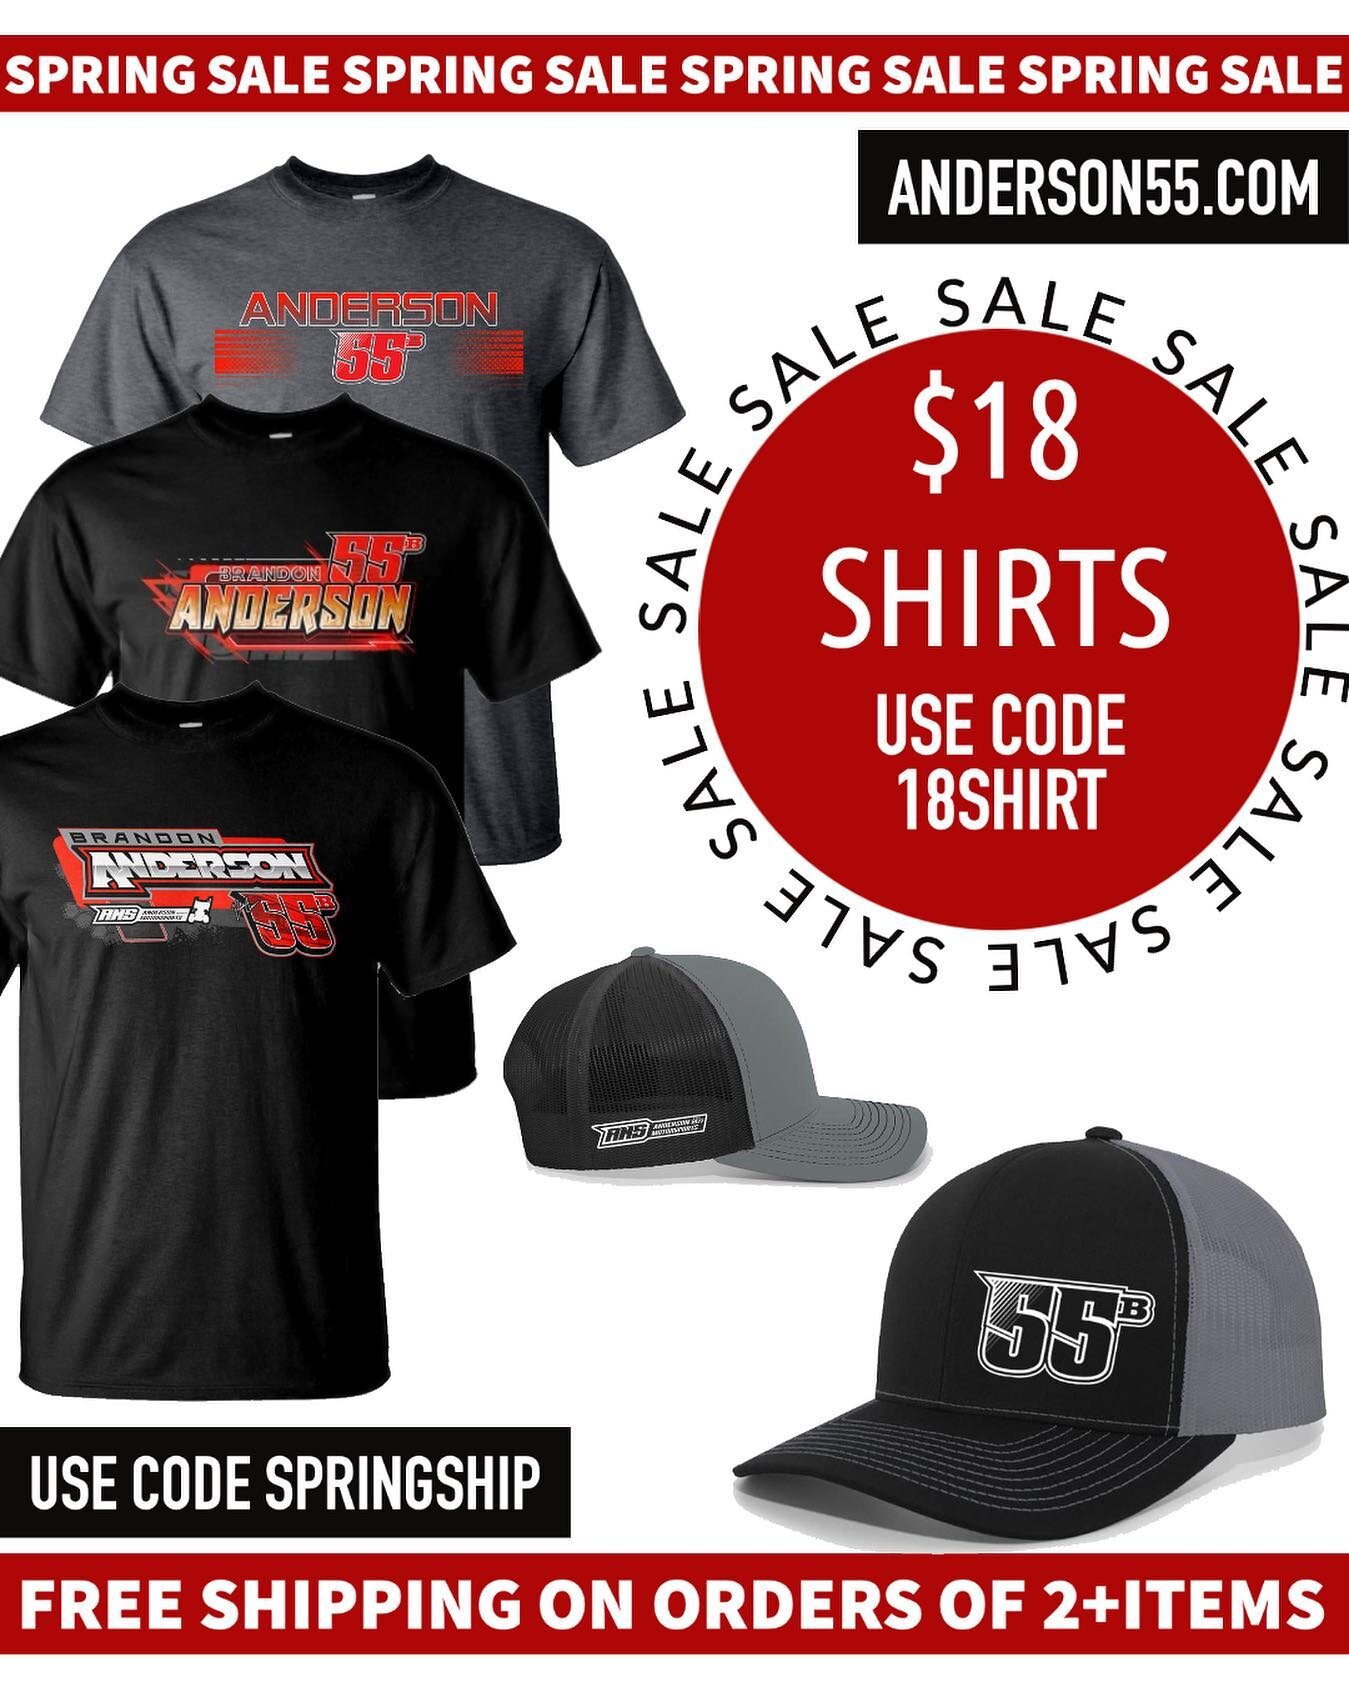 SPRING INTO SAVINGS

For one week only $18 shirts and free shipping on orders of 2+ items! 

Use Code 18SHIRT for $18 shirts
Use Code SPRINGSHIP for free shipping on 2+items 

Codes can be used together! 

Head over to anderson55.com to shop!